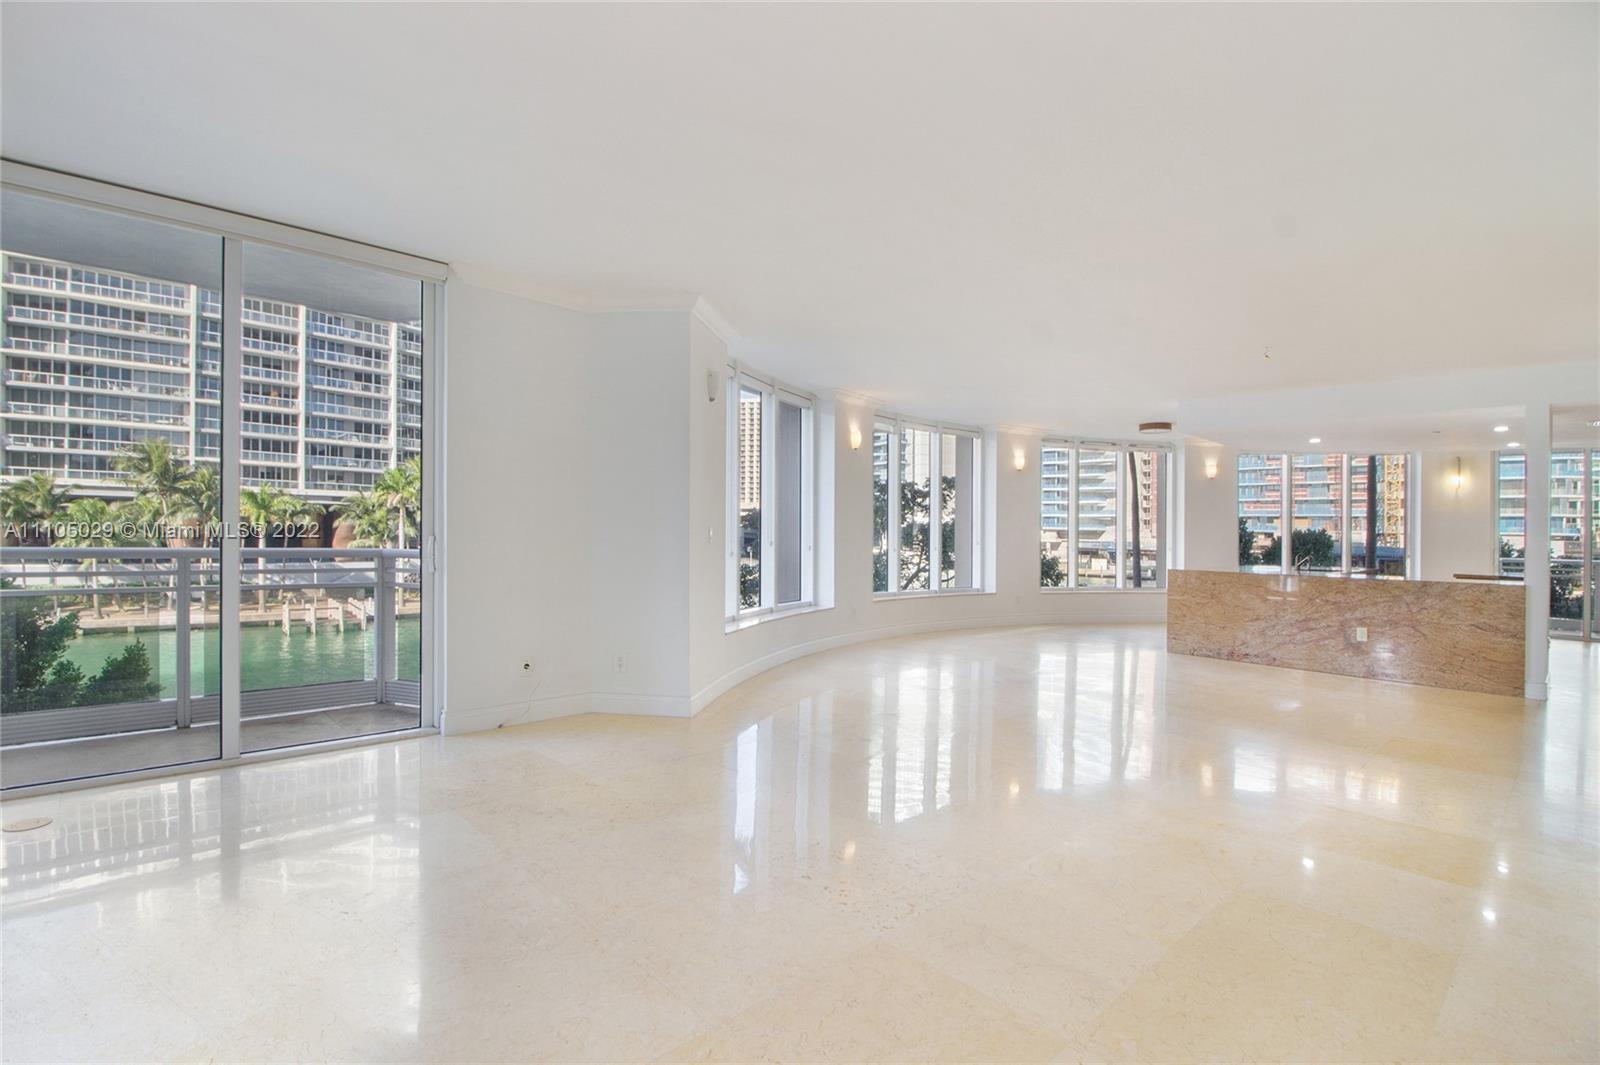 Live on top of the Biscayne Bay and Miami River in this spacious corner unit which feels like a home on the exclusive Island of Brickell Key. Nearly 2,600 SqFt completely surrounded by water in the most desirable 04-line of Carbonell. 3 bedrooms, 3.5 bathrooms, high ceilings, open kitchen & much more. Carbonell is a full service condo which feels like a 5-star resort: Pool, State of the Art Fitness Center, Sauna, Tennis & Racquetball Courts, BBQ Area, Kids Playroom, 24 hrs concierge, security & valet service. Exclusive Brickell Key Island is a gated community and walking distance to Brickell City Centre and all the shopping, restaurants, retail that Brickell has to offer.